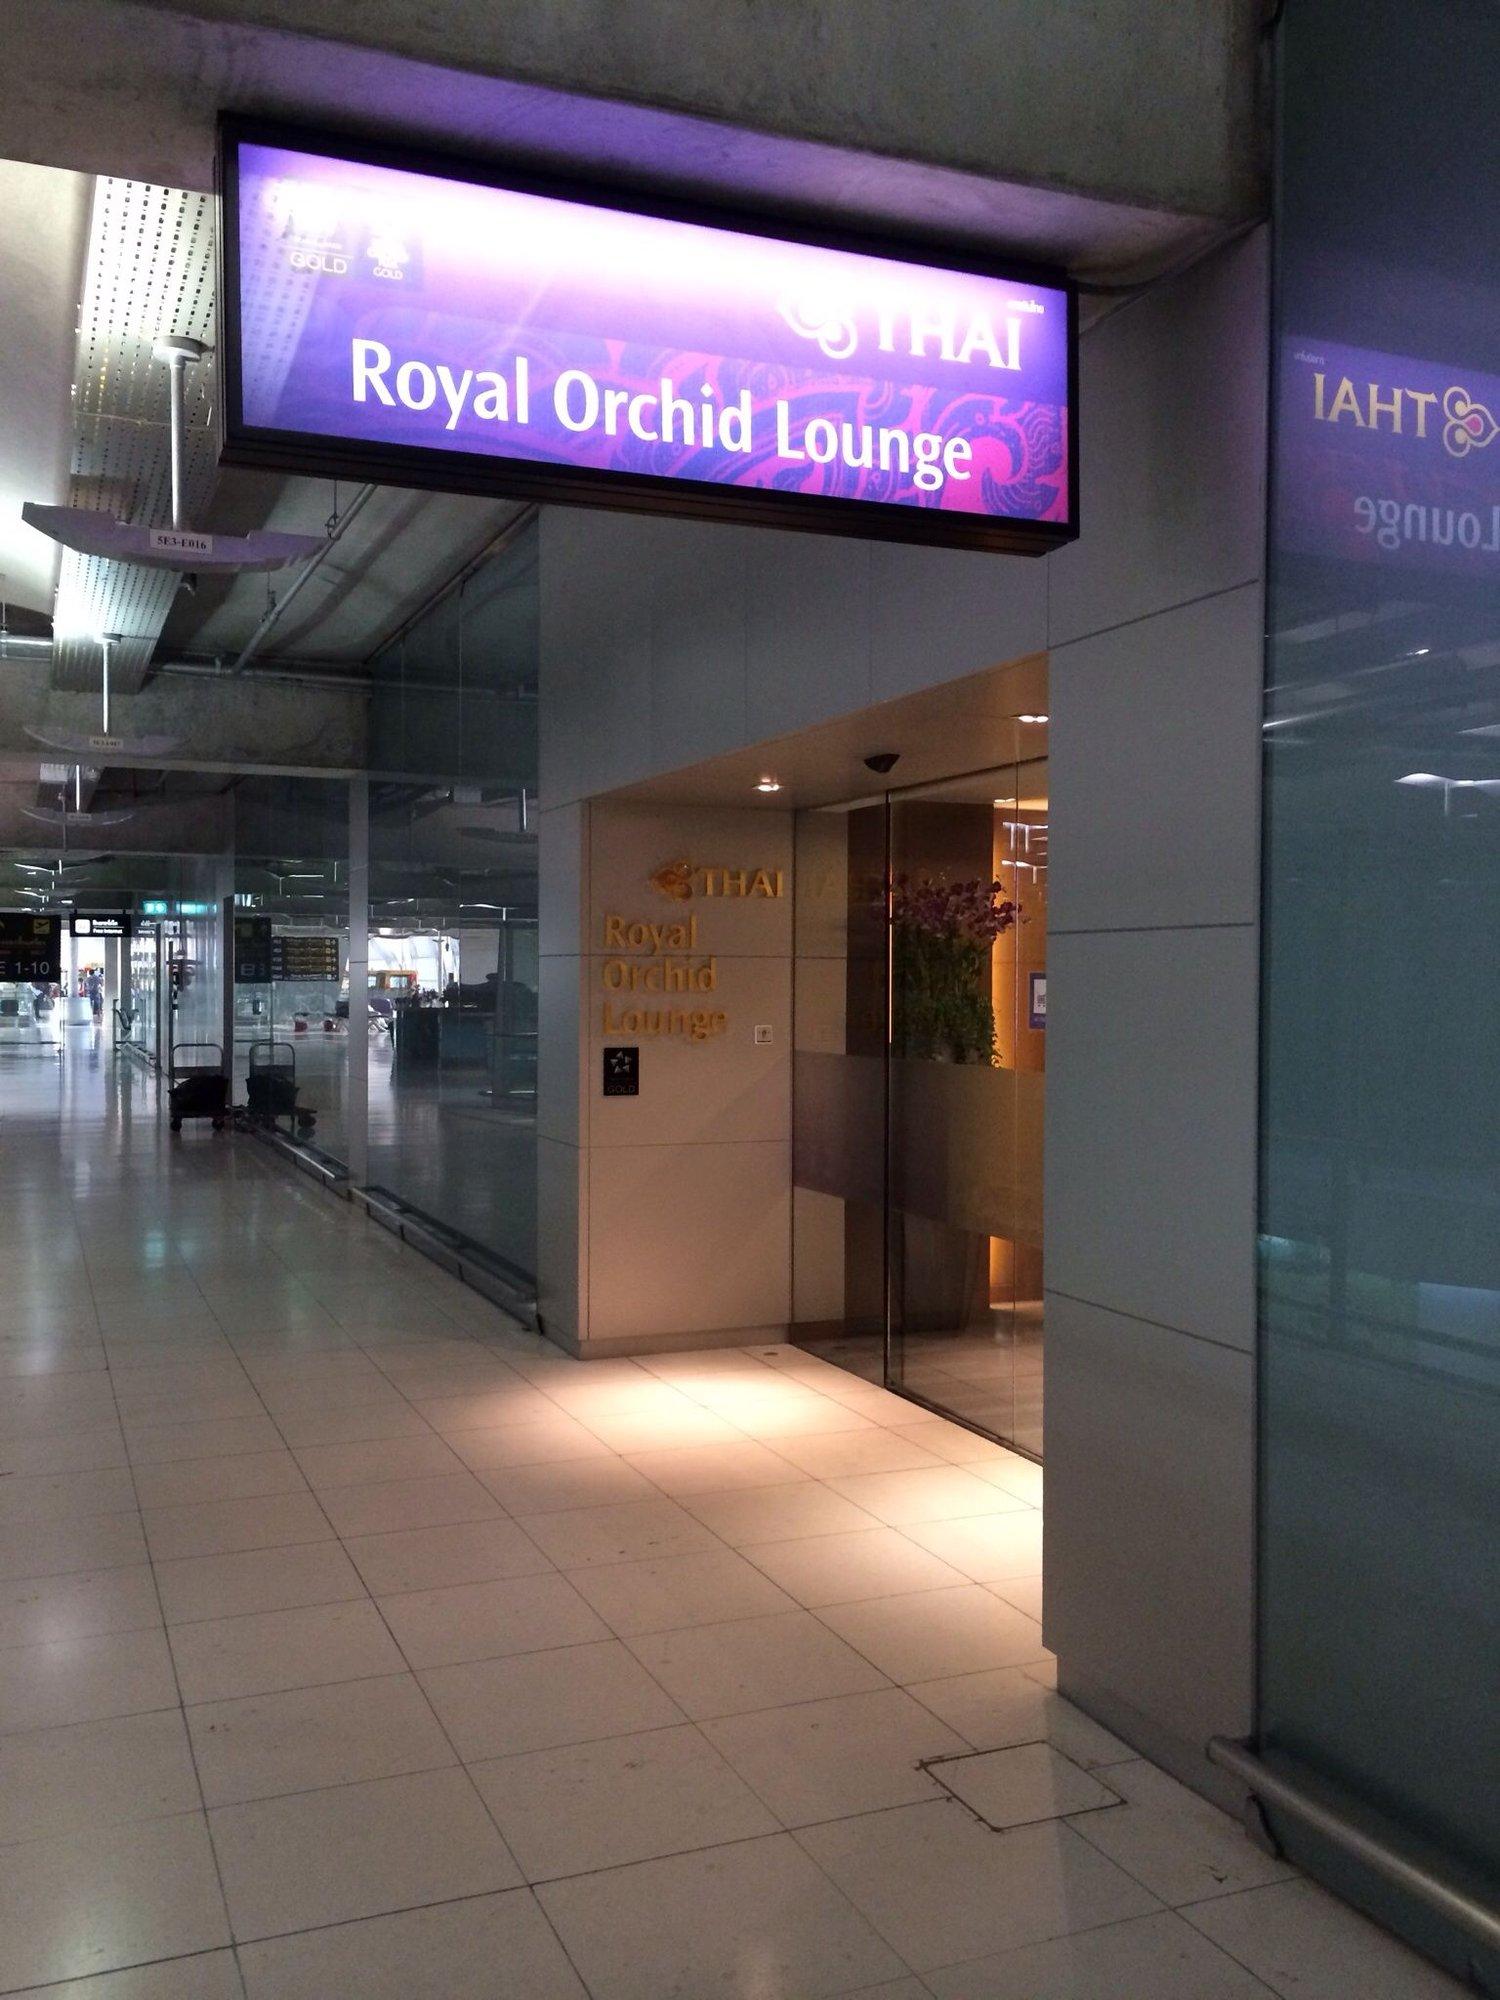 Thai Airways Royal Orchid Lounge image 2 of 15